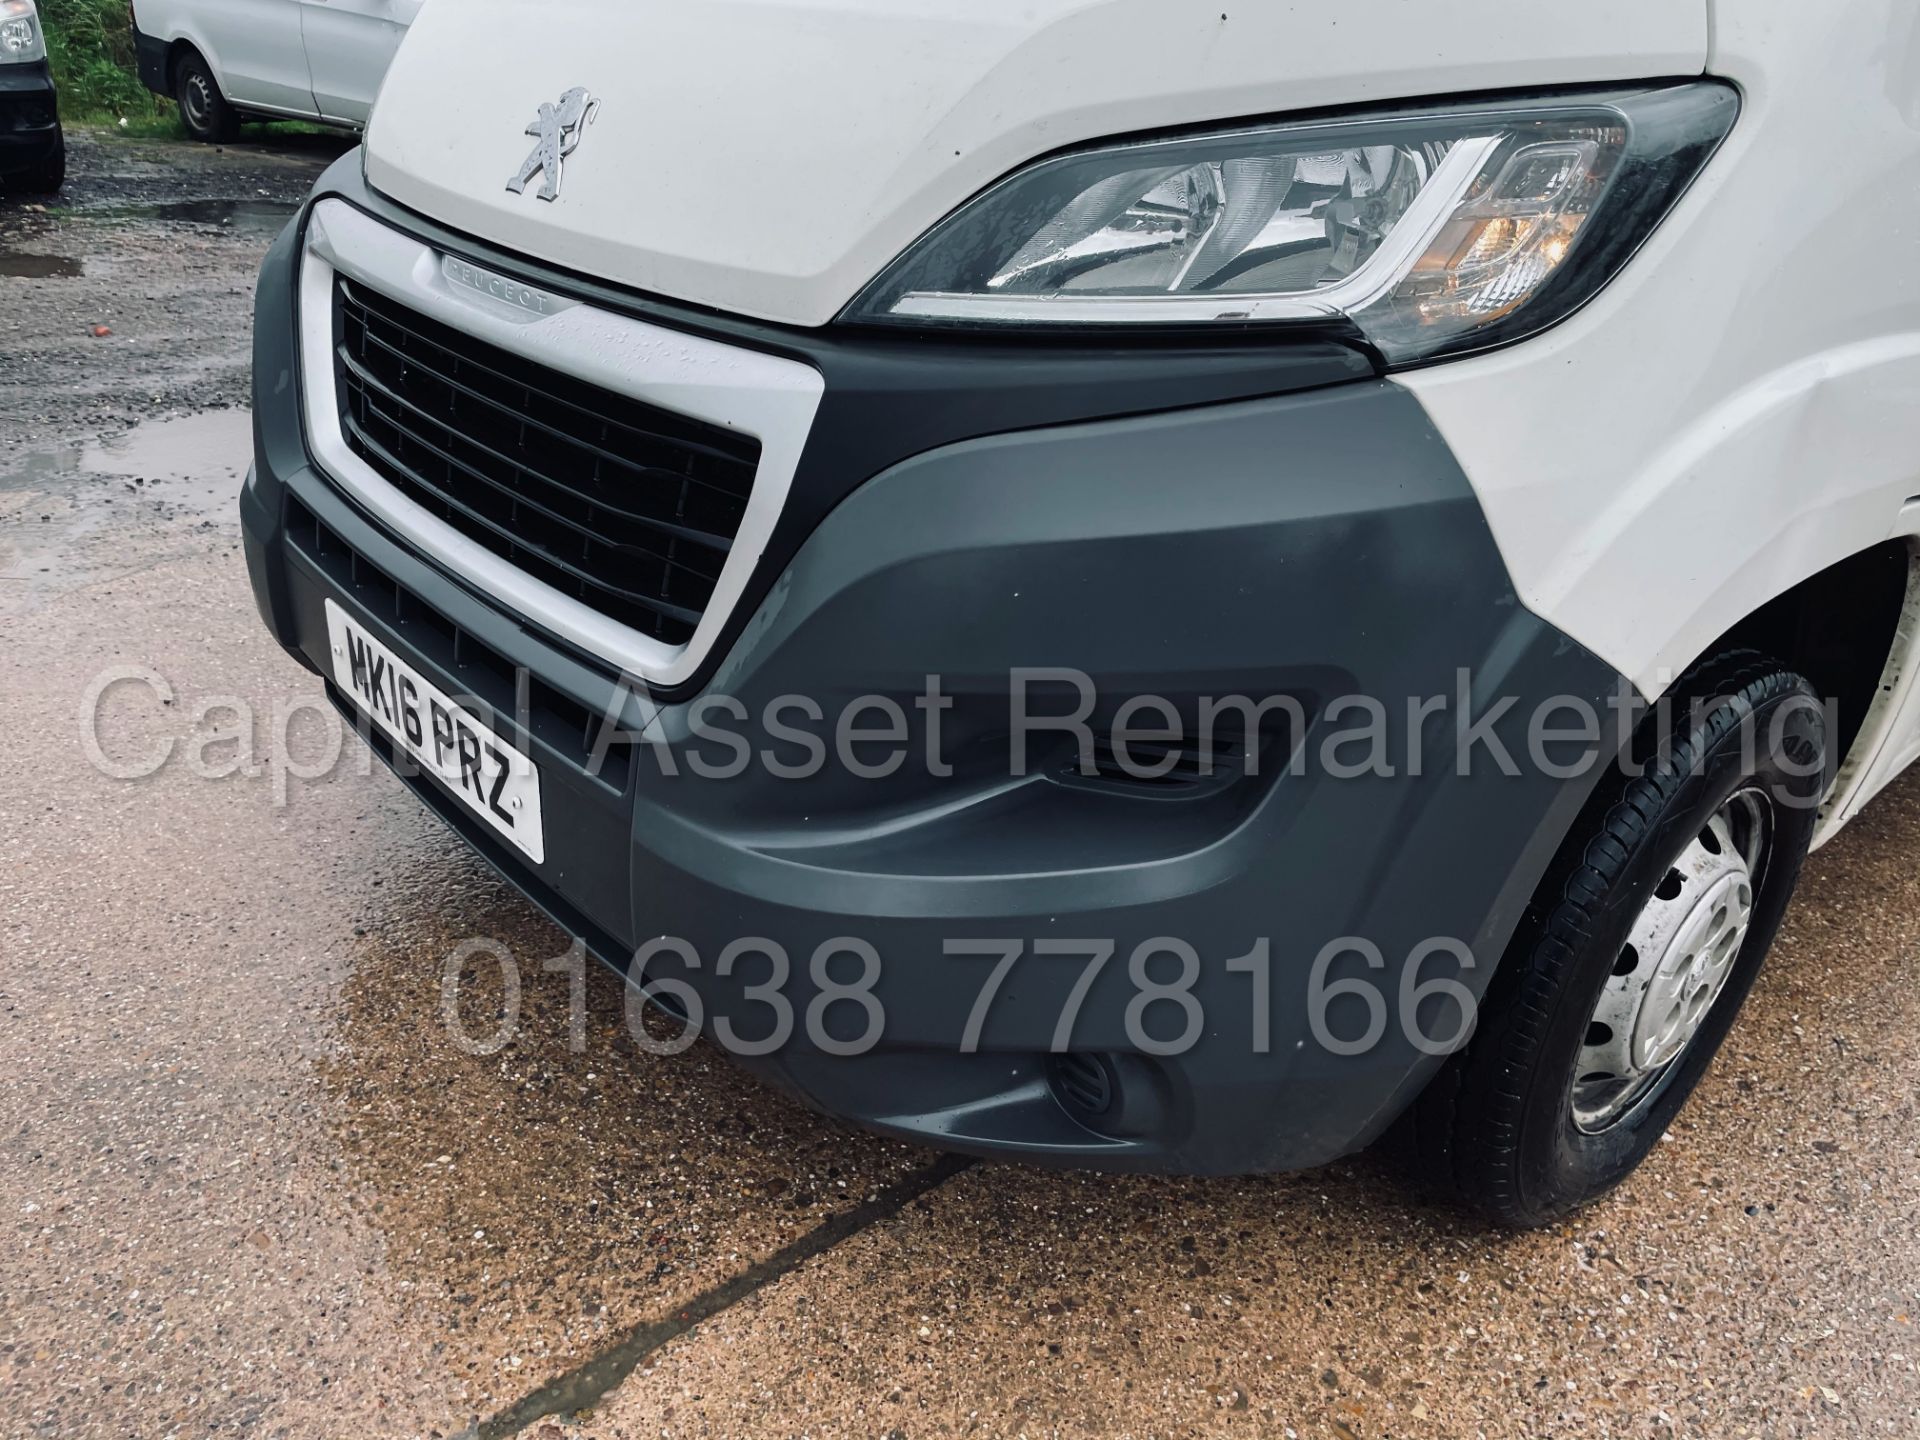 PEUGEOT BOXER 335 *PROFESSIONAL* LWB HI-ROOF (2016) '2.2 HDI - 130 BHP - 6 SPEED' *A/C* (1 OWNER) - Image 16 of 41